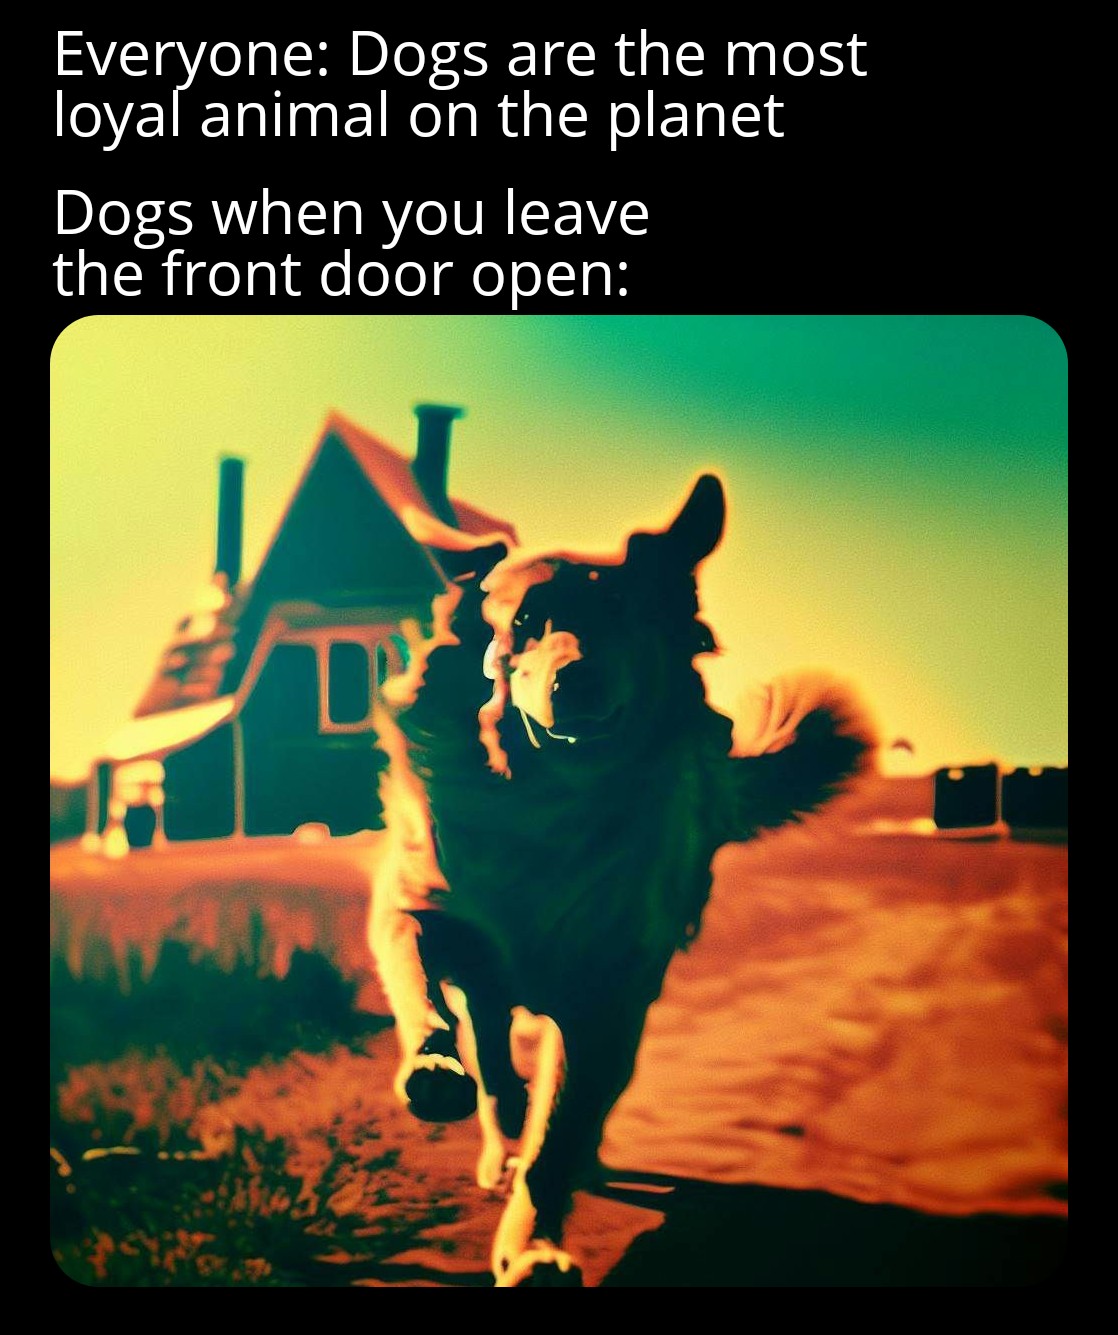 monday morning randomness - poster - Everyone Dogs are the most loyal animal on the planet Dogs when you leave the front door open